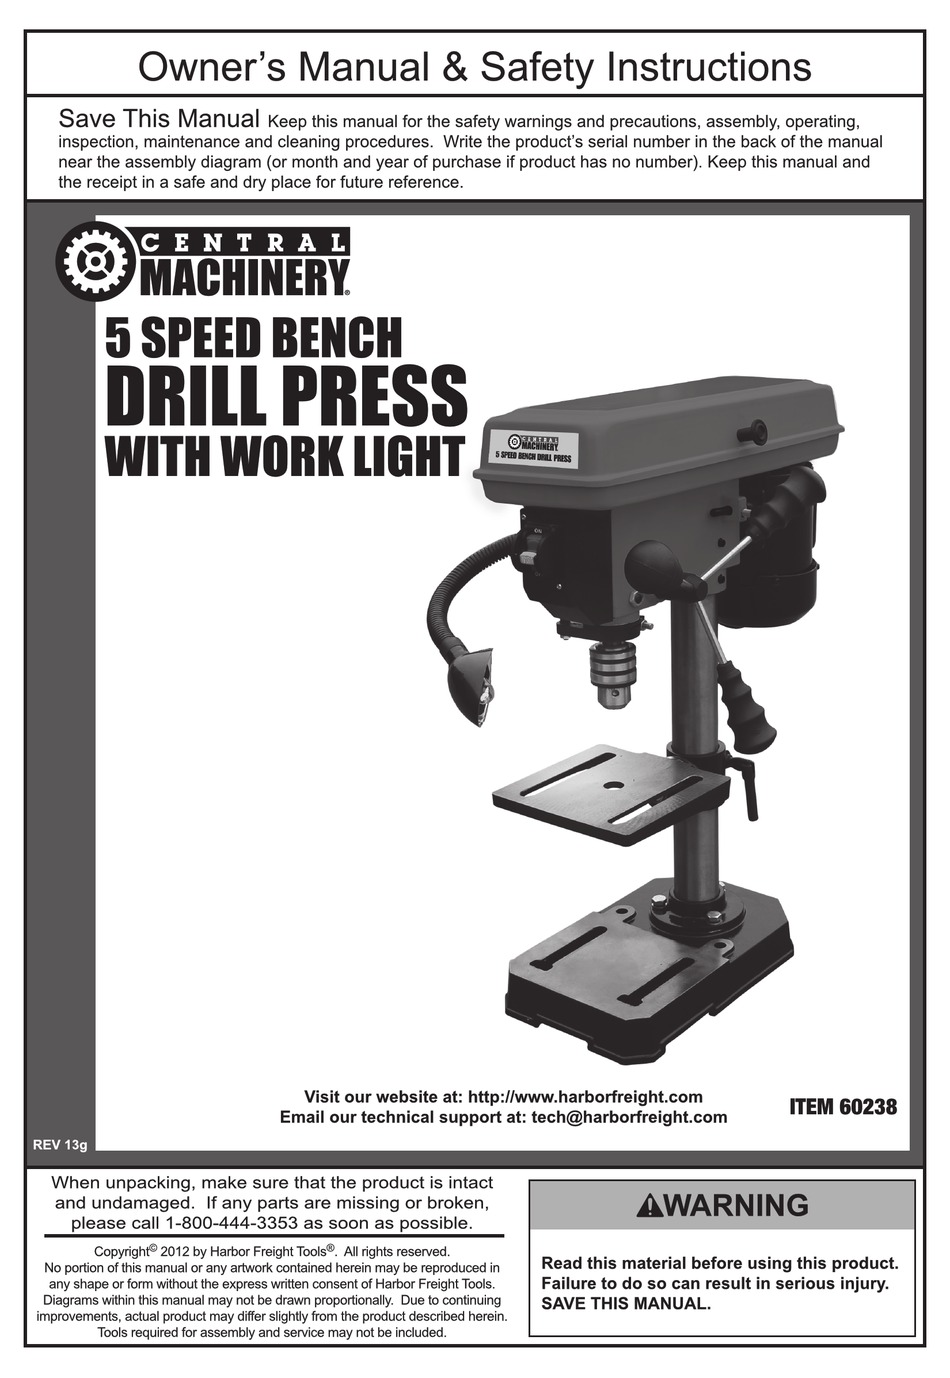 CENTRAL MACHINERY 5 SPEED BENCH DRILL PRESS WITH WORK LIGHT OWNER'S